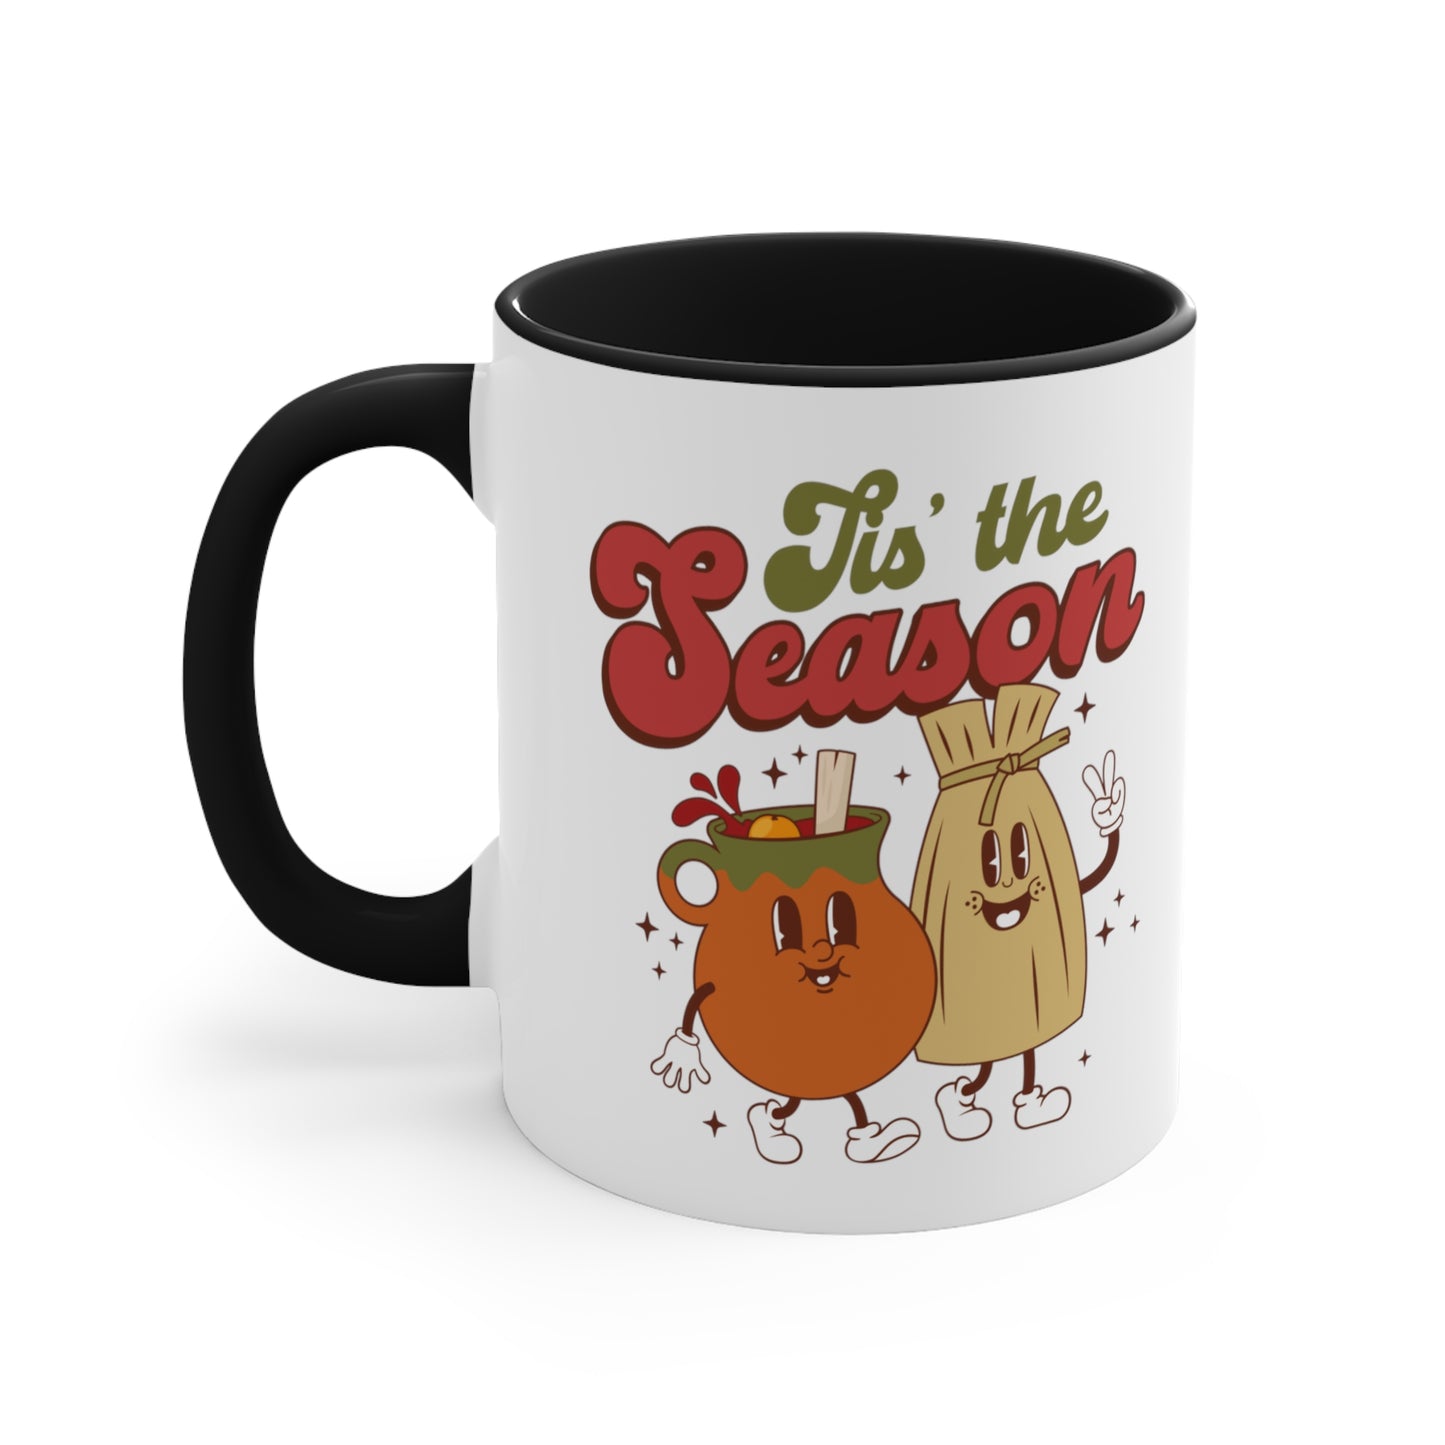 Mexican Coffee Mug, 11oz. Tamal y ponche mug for Mexican family or friends. This is the season Mexican edition.